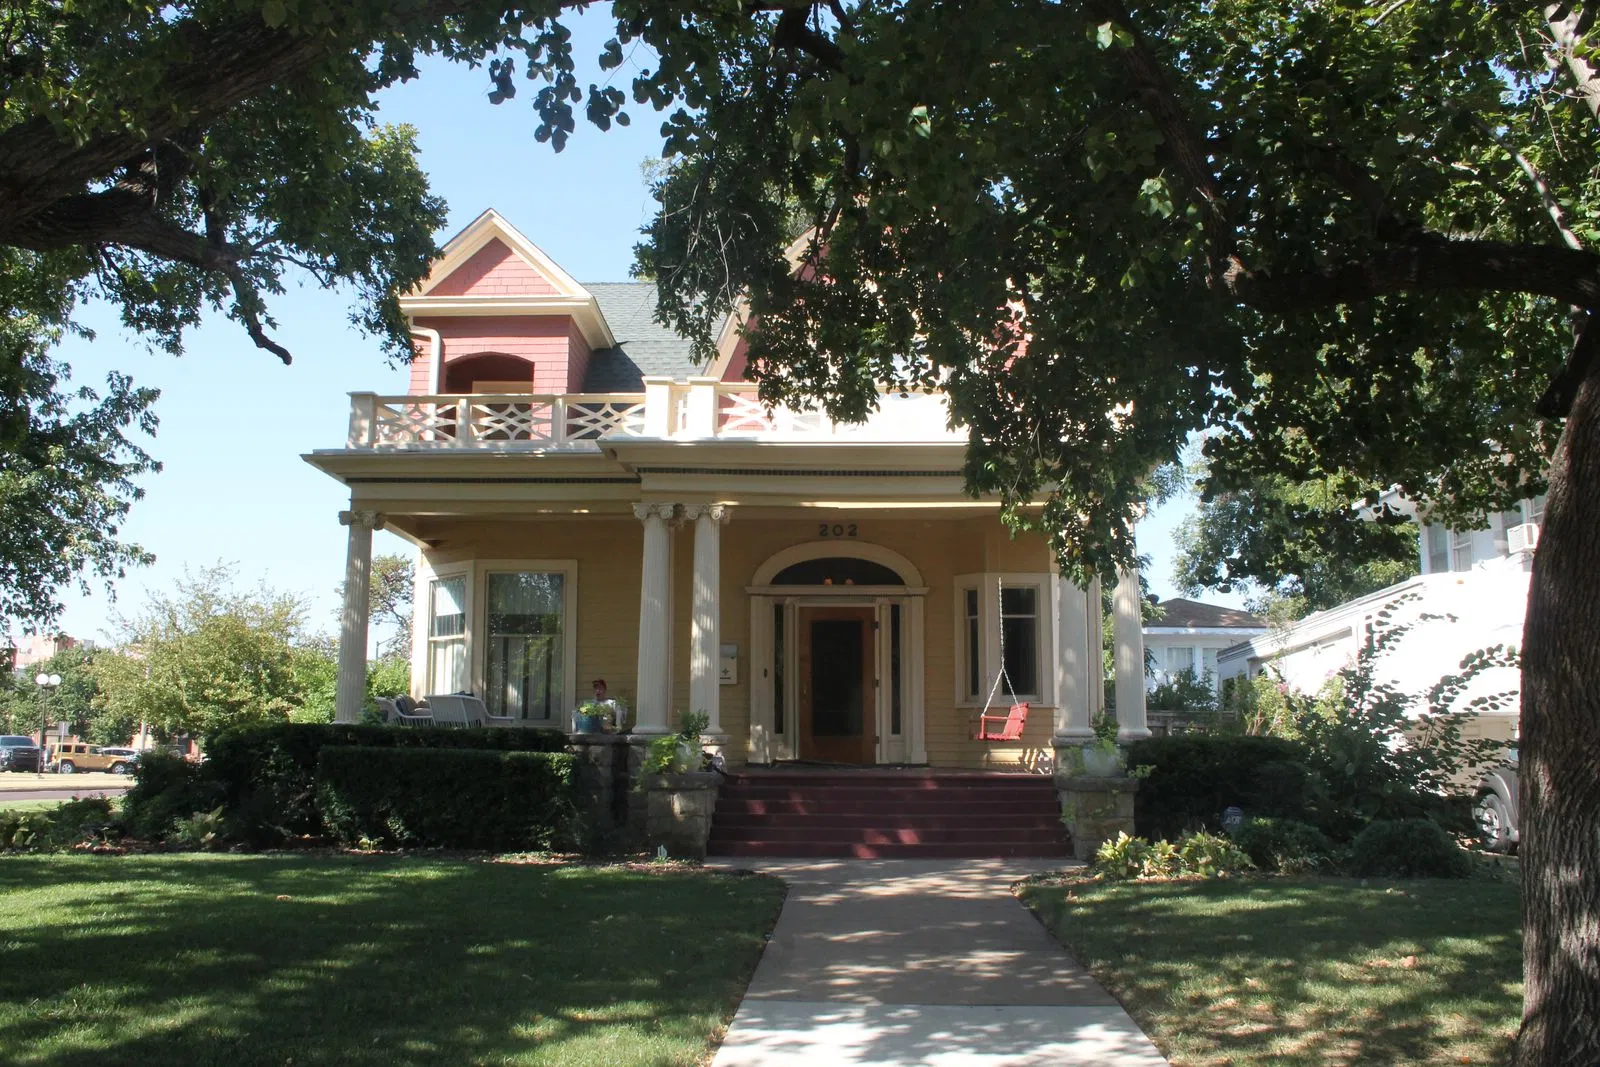 Three Oklahoma Architectural Gems secure Spots on National Register of Historic Places, Including the Dr. William A.T. Robertson House in Kay County